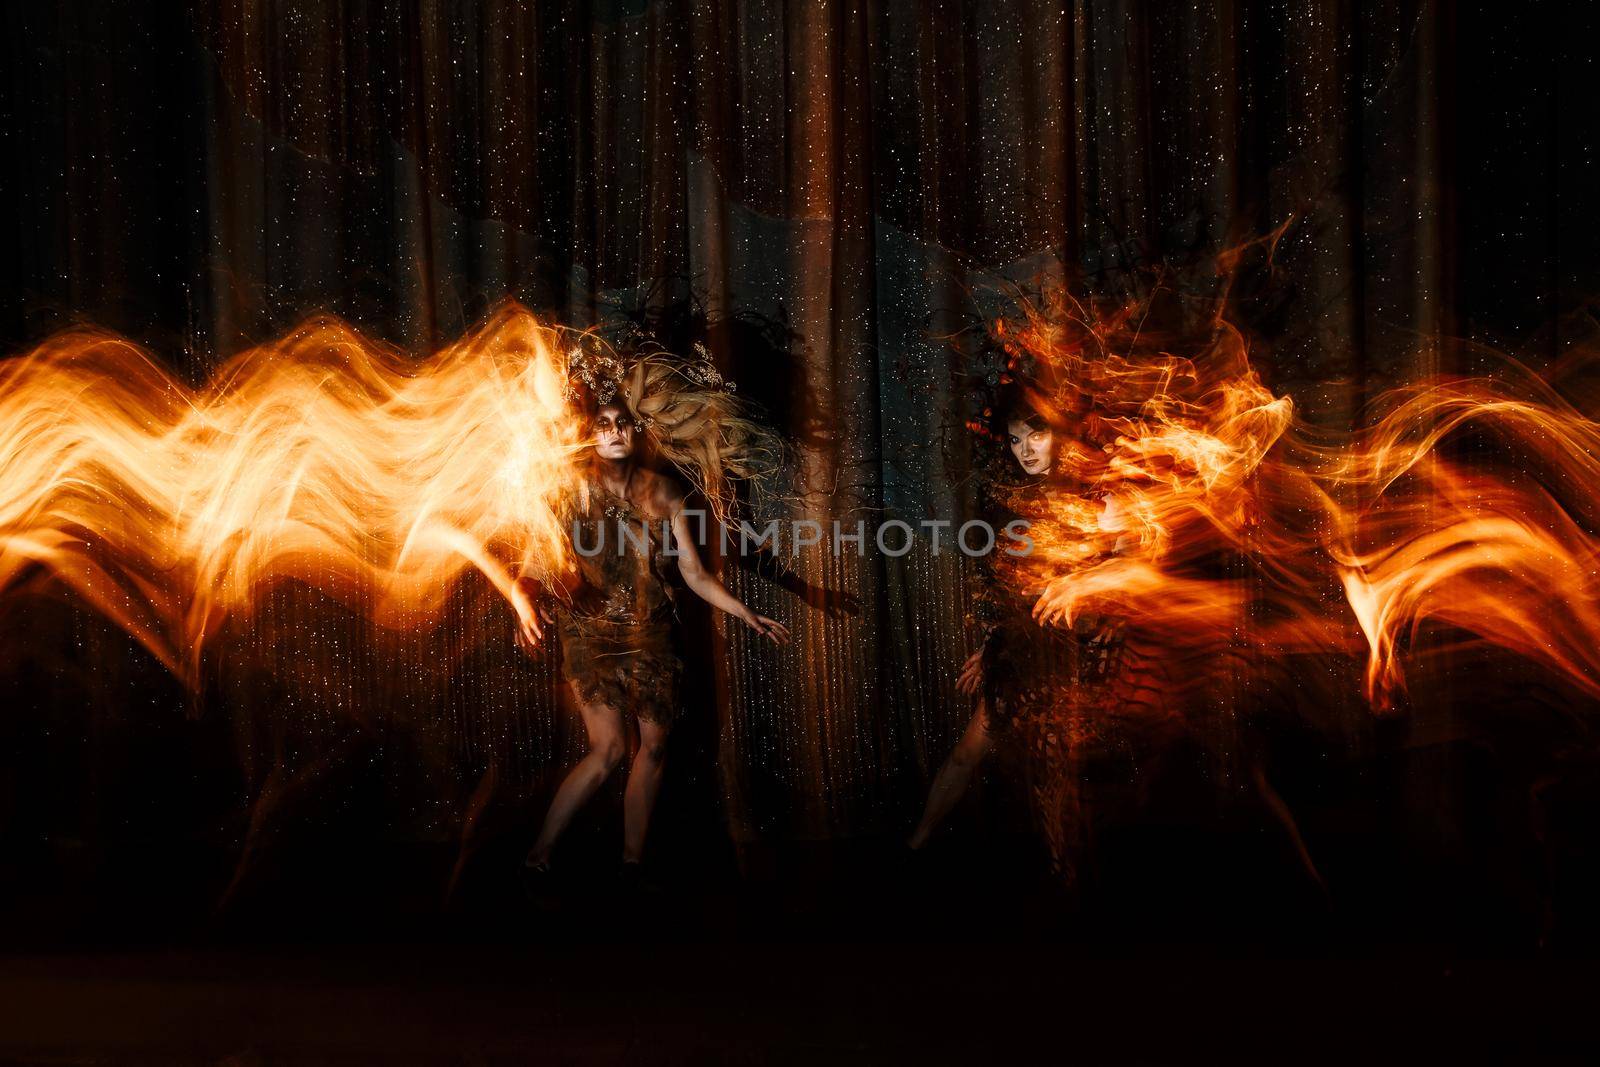 Ghost girls, spirits of the theater, accompanied by a trail of fire, on the stage of the theater.